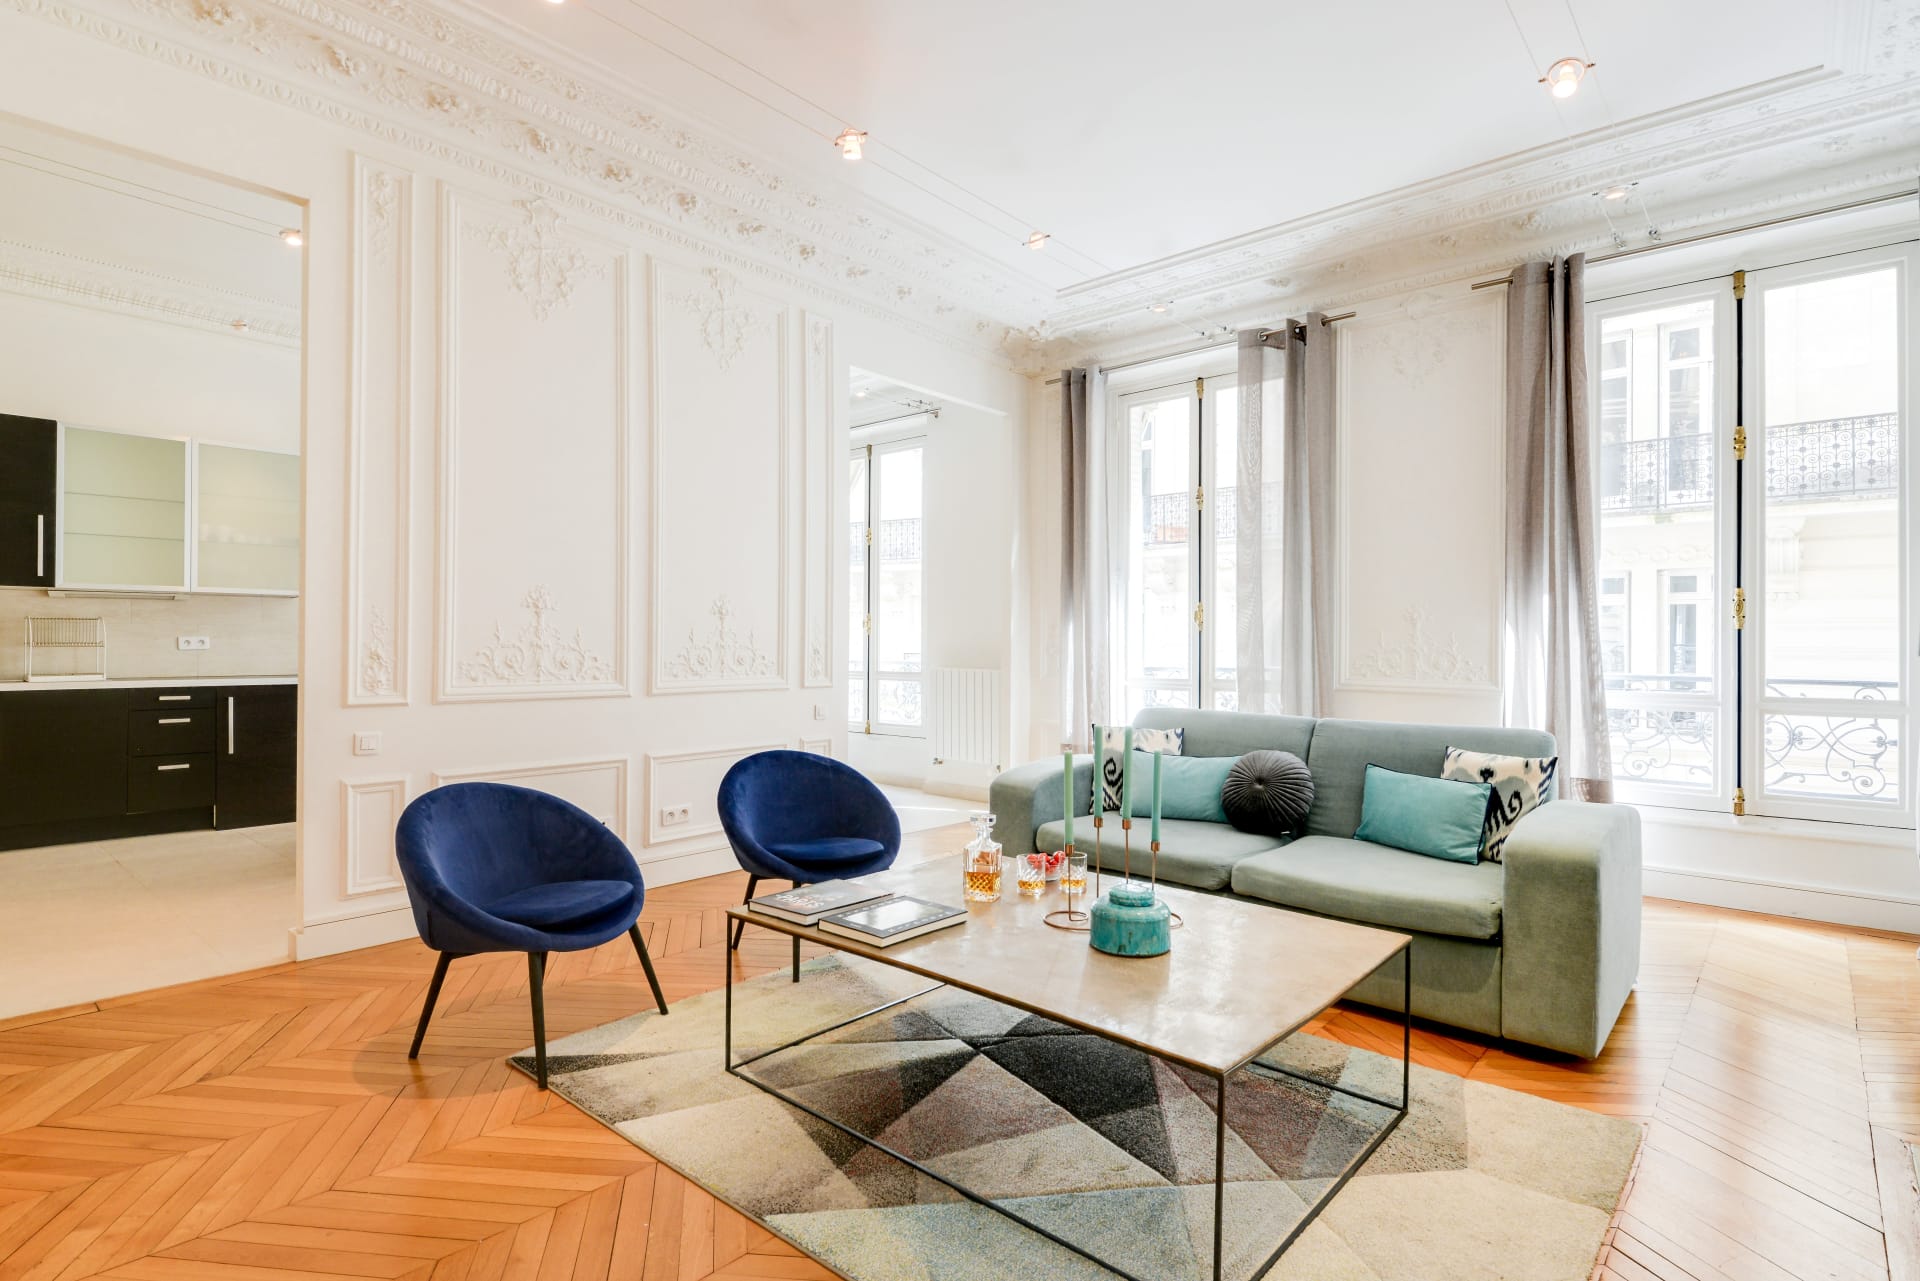 Property Image 2 - Stylish one-bedroom apartment located in the best part of Paris